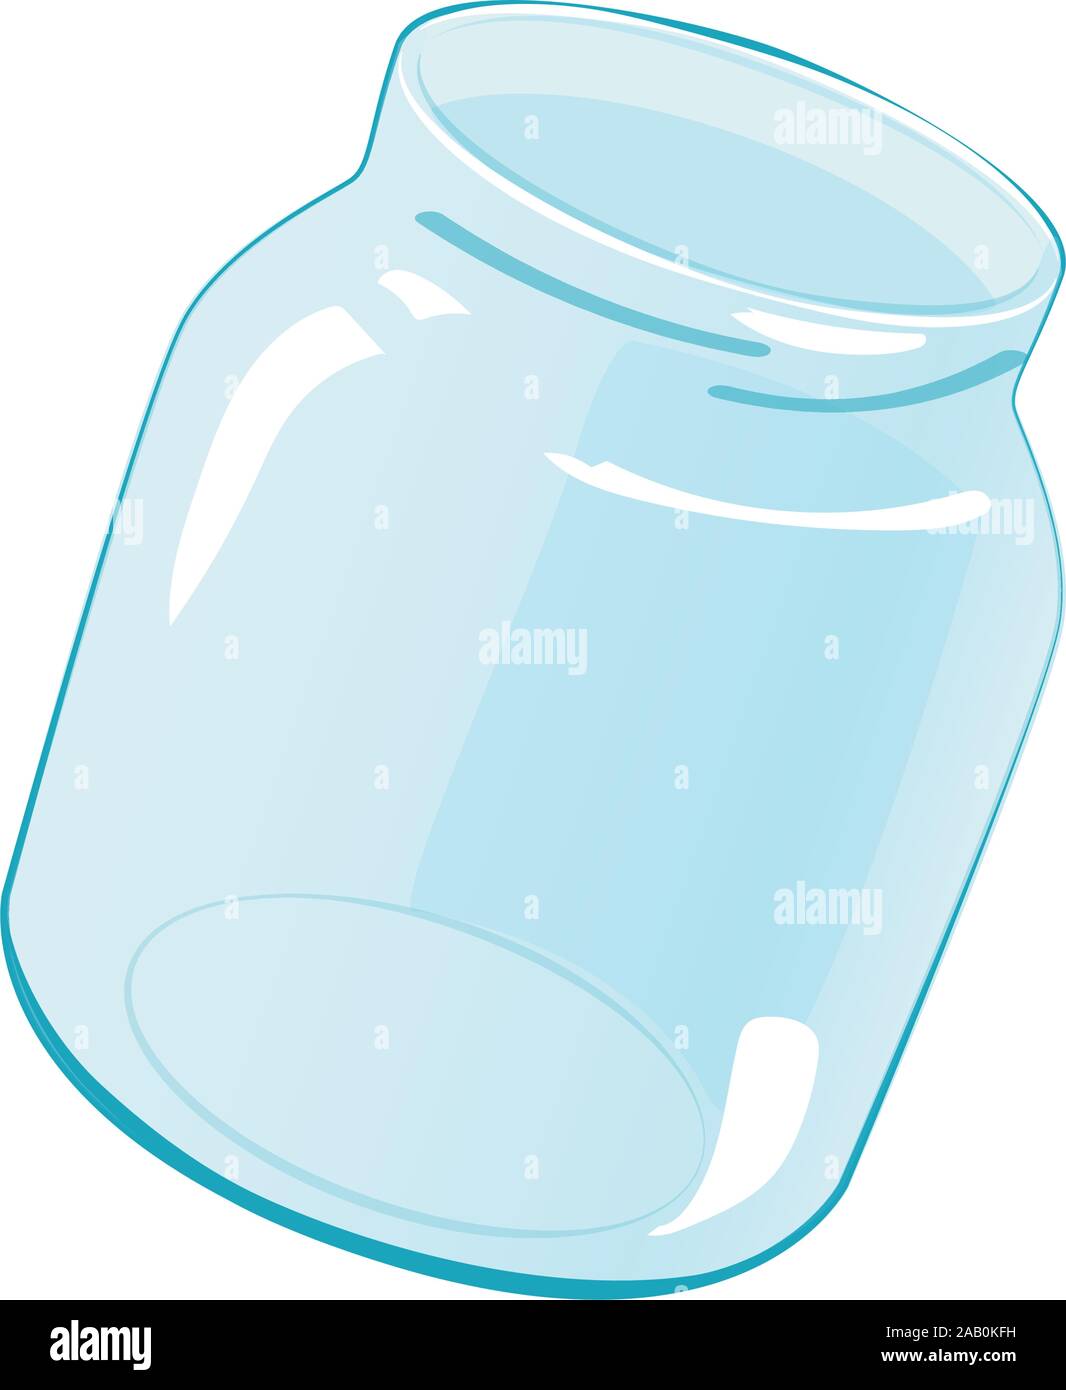 Empty open big glass jar for canning and preserving bulk and liquid product isolated on white background. Flat drawing vector icon. single kitchen ware stock design element Stock Vector